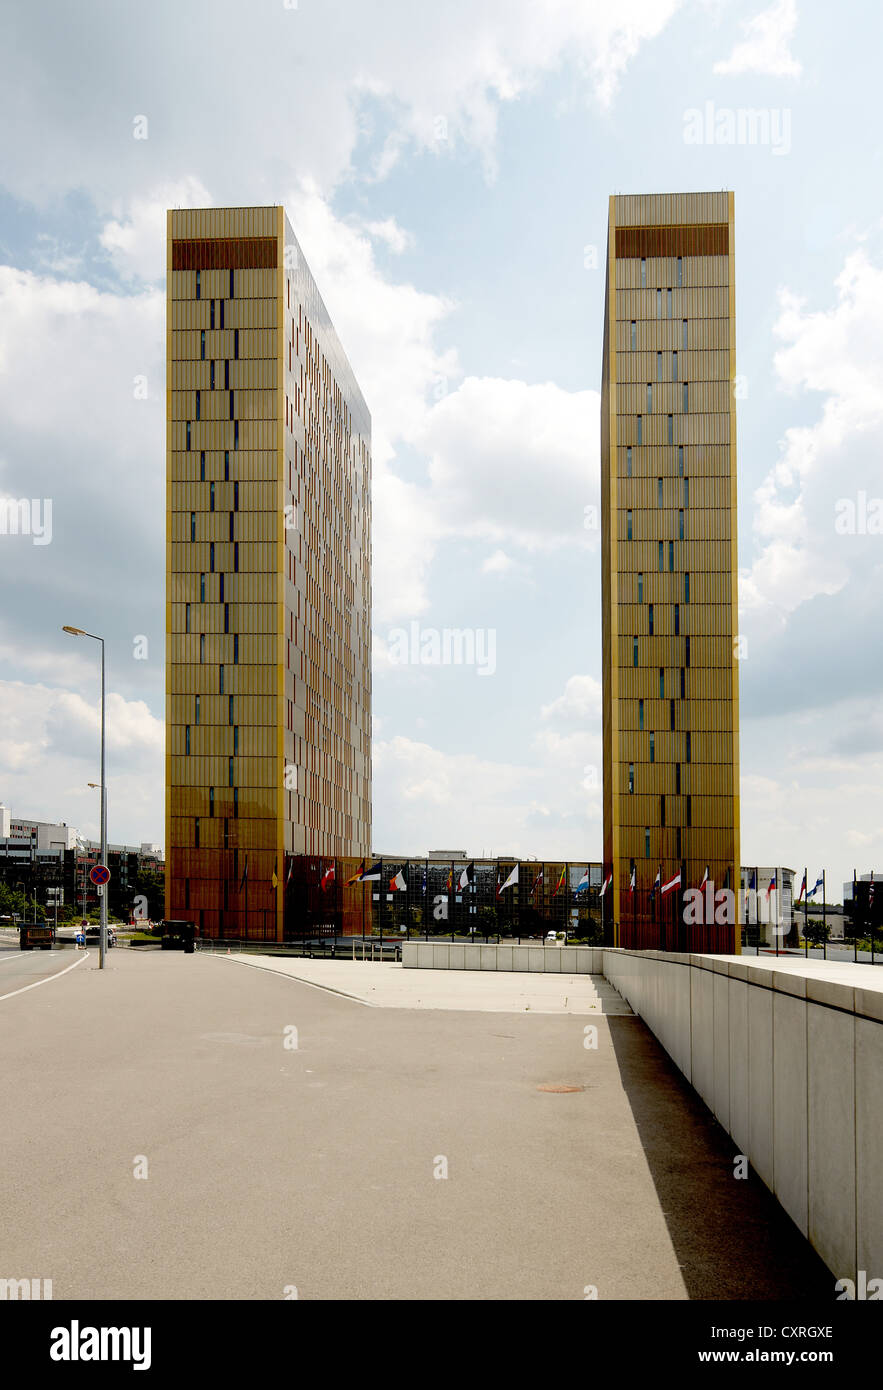 The two towers of the Court of Justice of the European Communities in Luxembourg, Europe Stock Photo